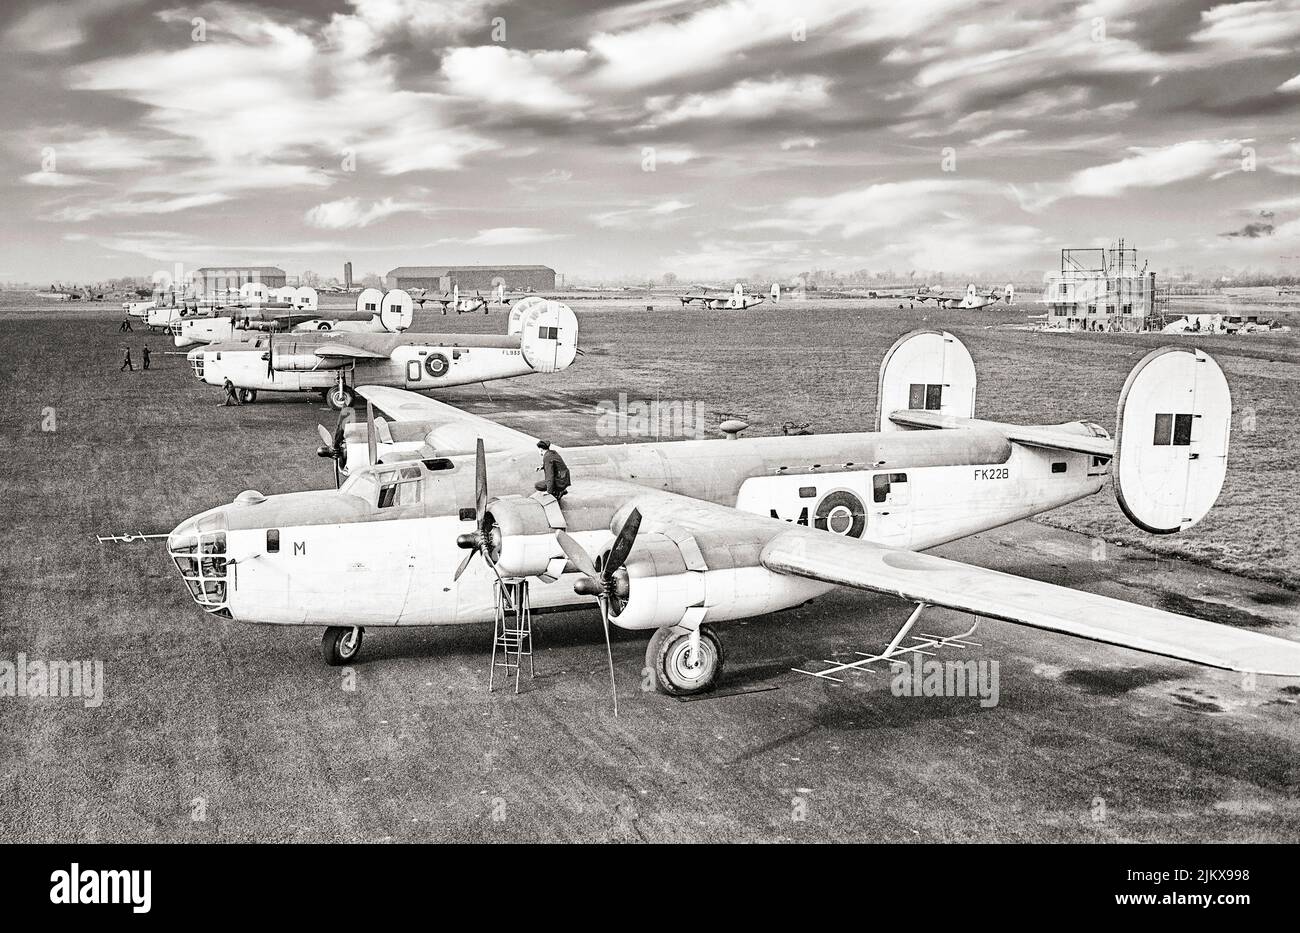 American heavy bombers, Consolidated B-24 Liberator GR Mark IIIs of No. 120 Squadron RAF, lined up with other aircraft at Aldergrove, County Antrim, Northern Ireland. The Mark IIIs are equipped with ASV Mark II anti-submarine radar, while the third aircraft in line, a GR Mark V of No. 86 Squadron RAF carries centrimetric ASV radar in a radome under the nose. Stock Photo